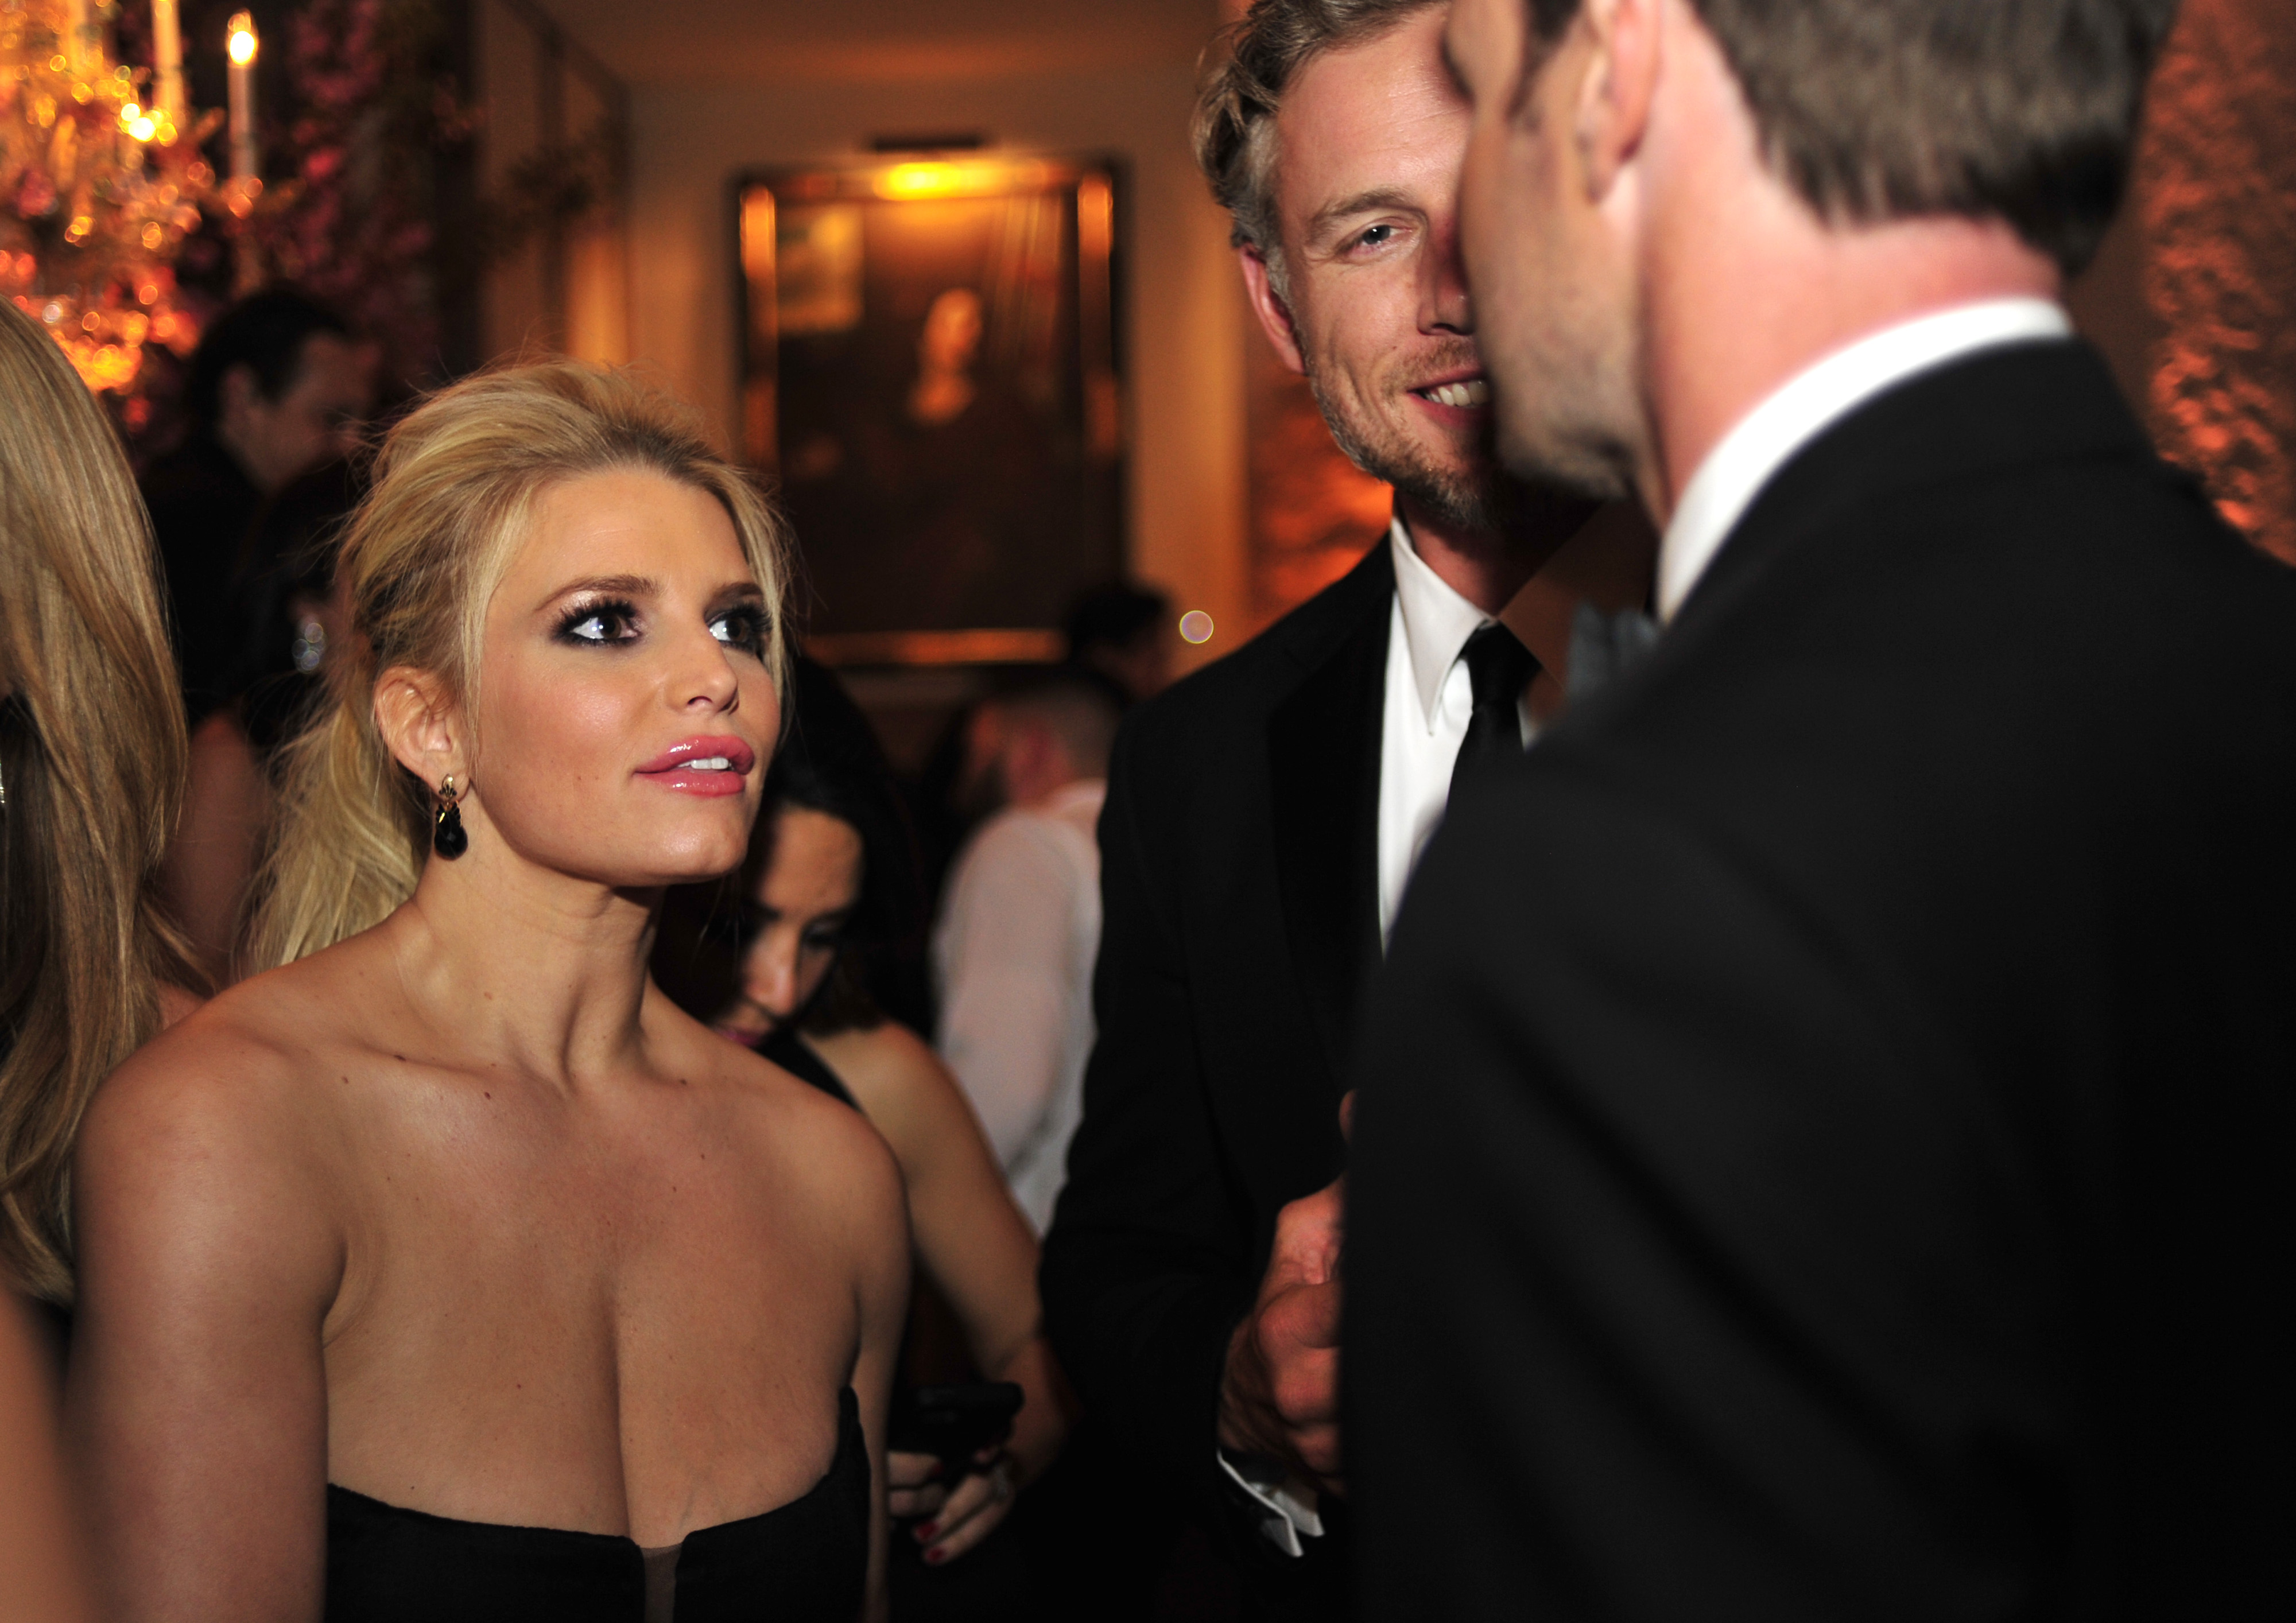 Jessica Simpson attends the after party of the Bloomberg/Vanity Fair White House Correspondents’ Association dinner in Washington on Saturday, May 3, 2014.
